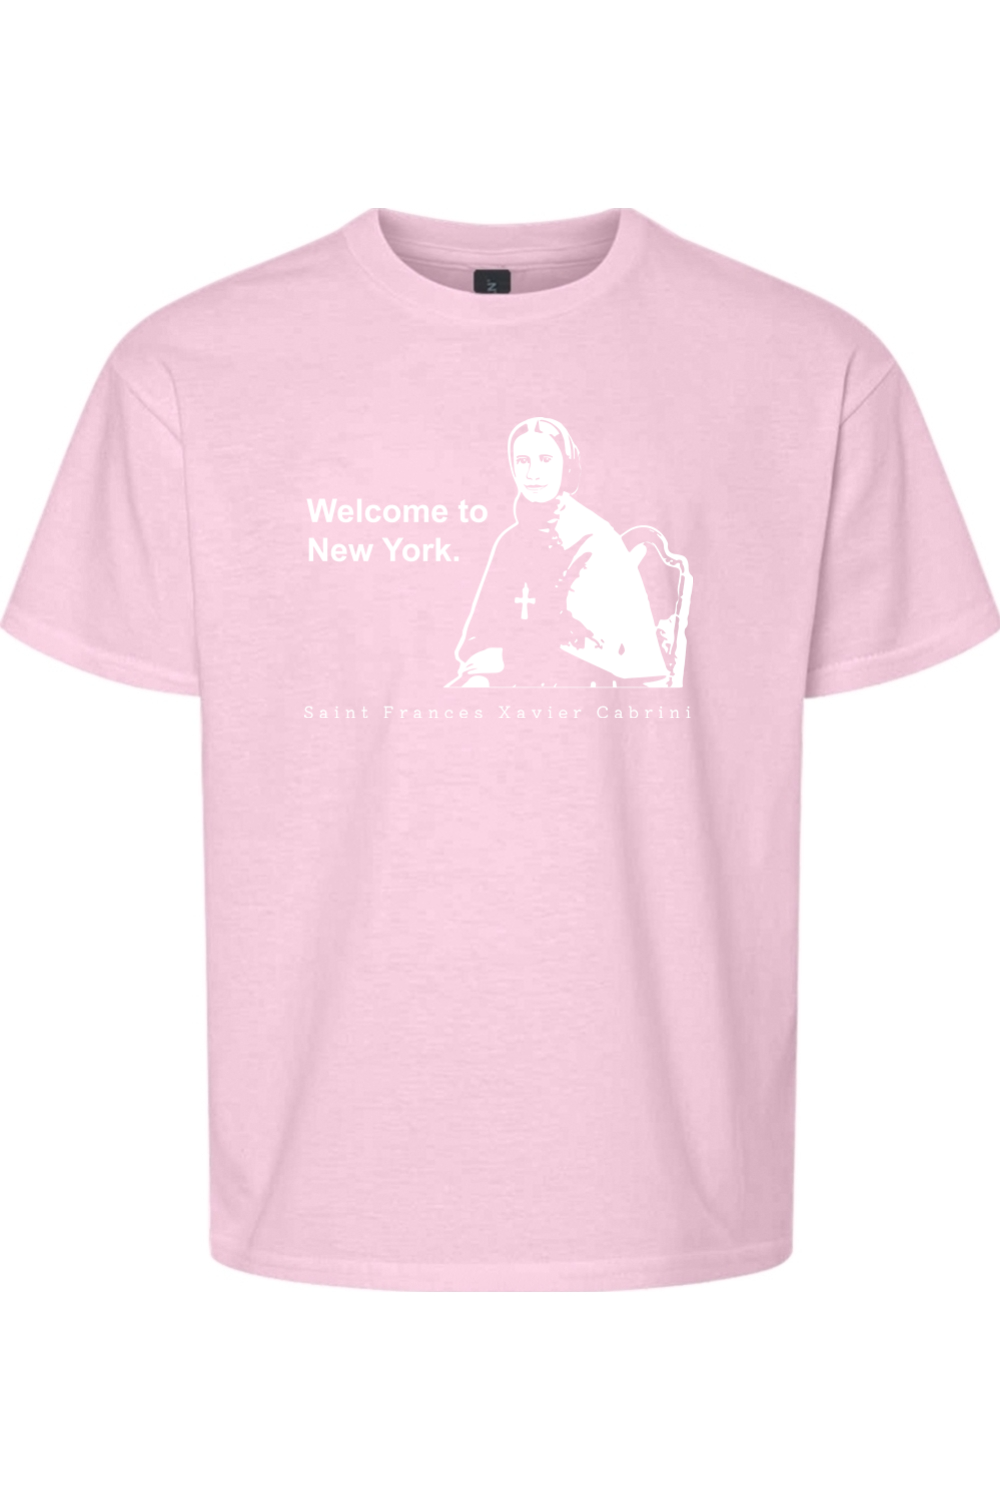 Welcome to New York - St. Frances Cabrini Youth T-shirt